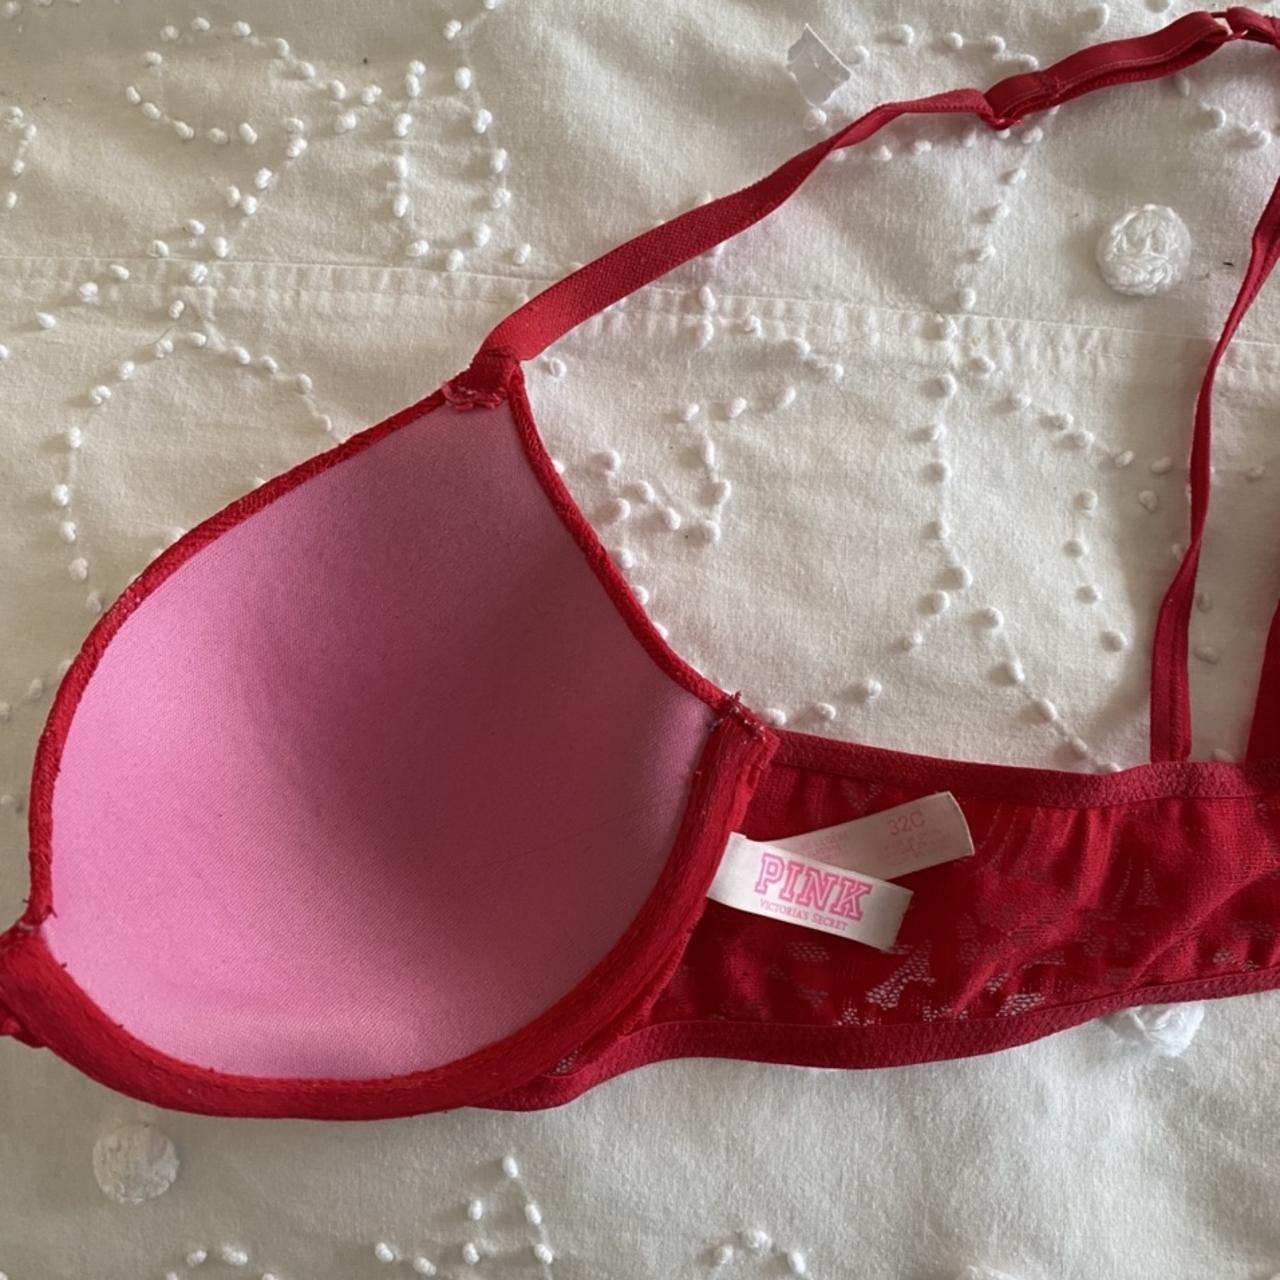 Red Victoria secret PINK bra with lace back. Used